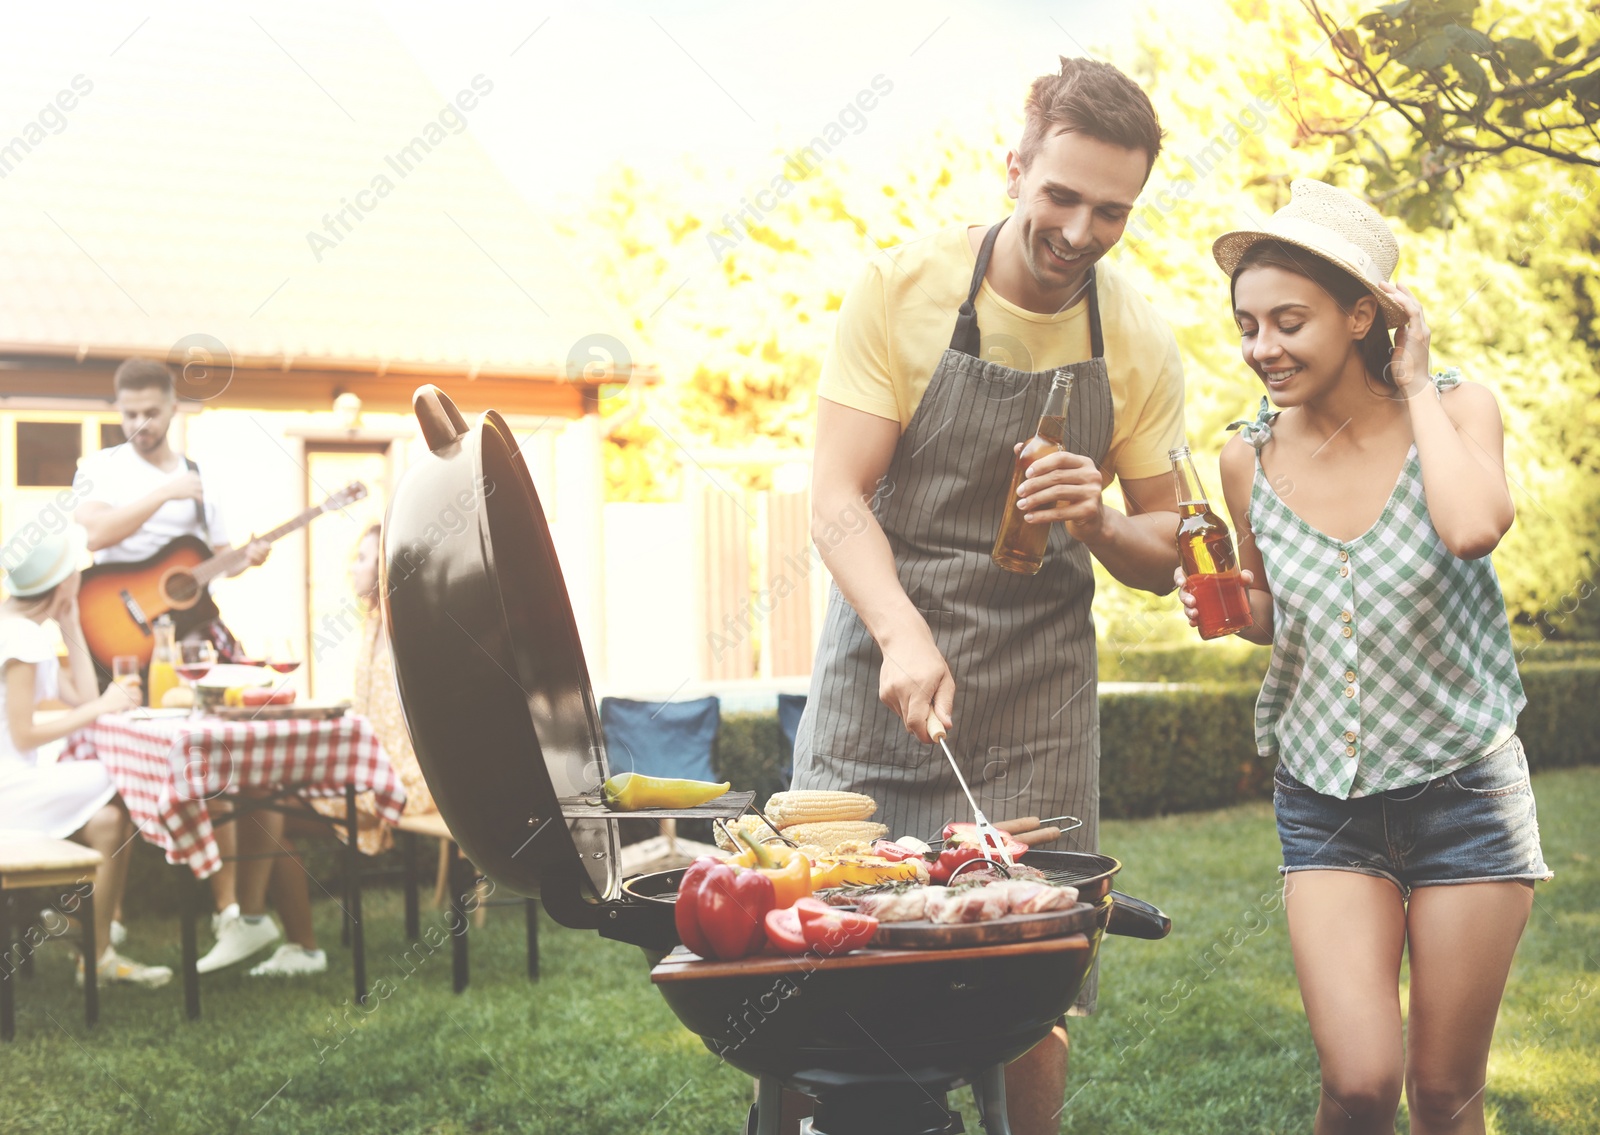 Image of Young man and woman near barbecue grill outdoors on sunny day